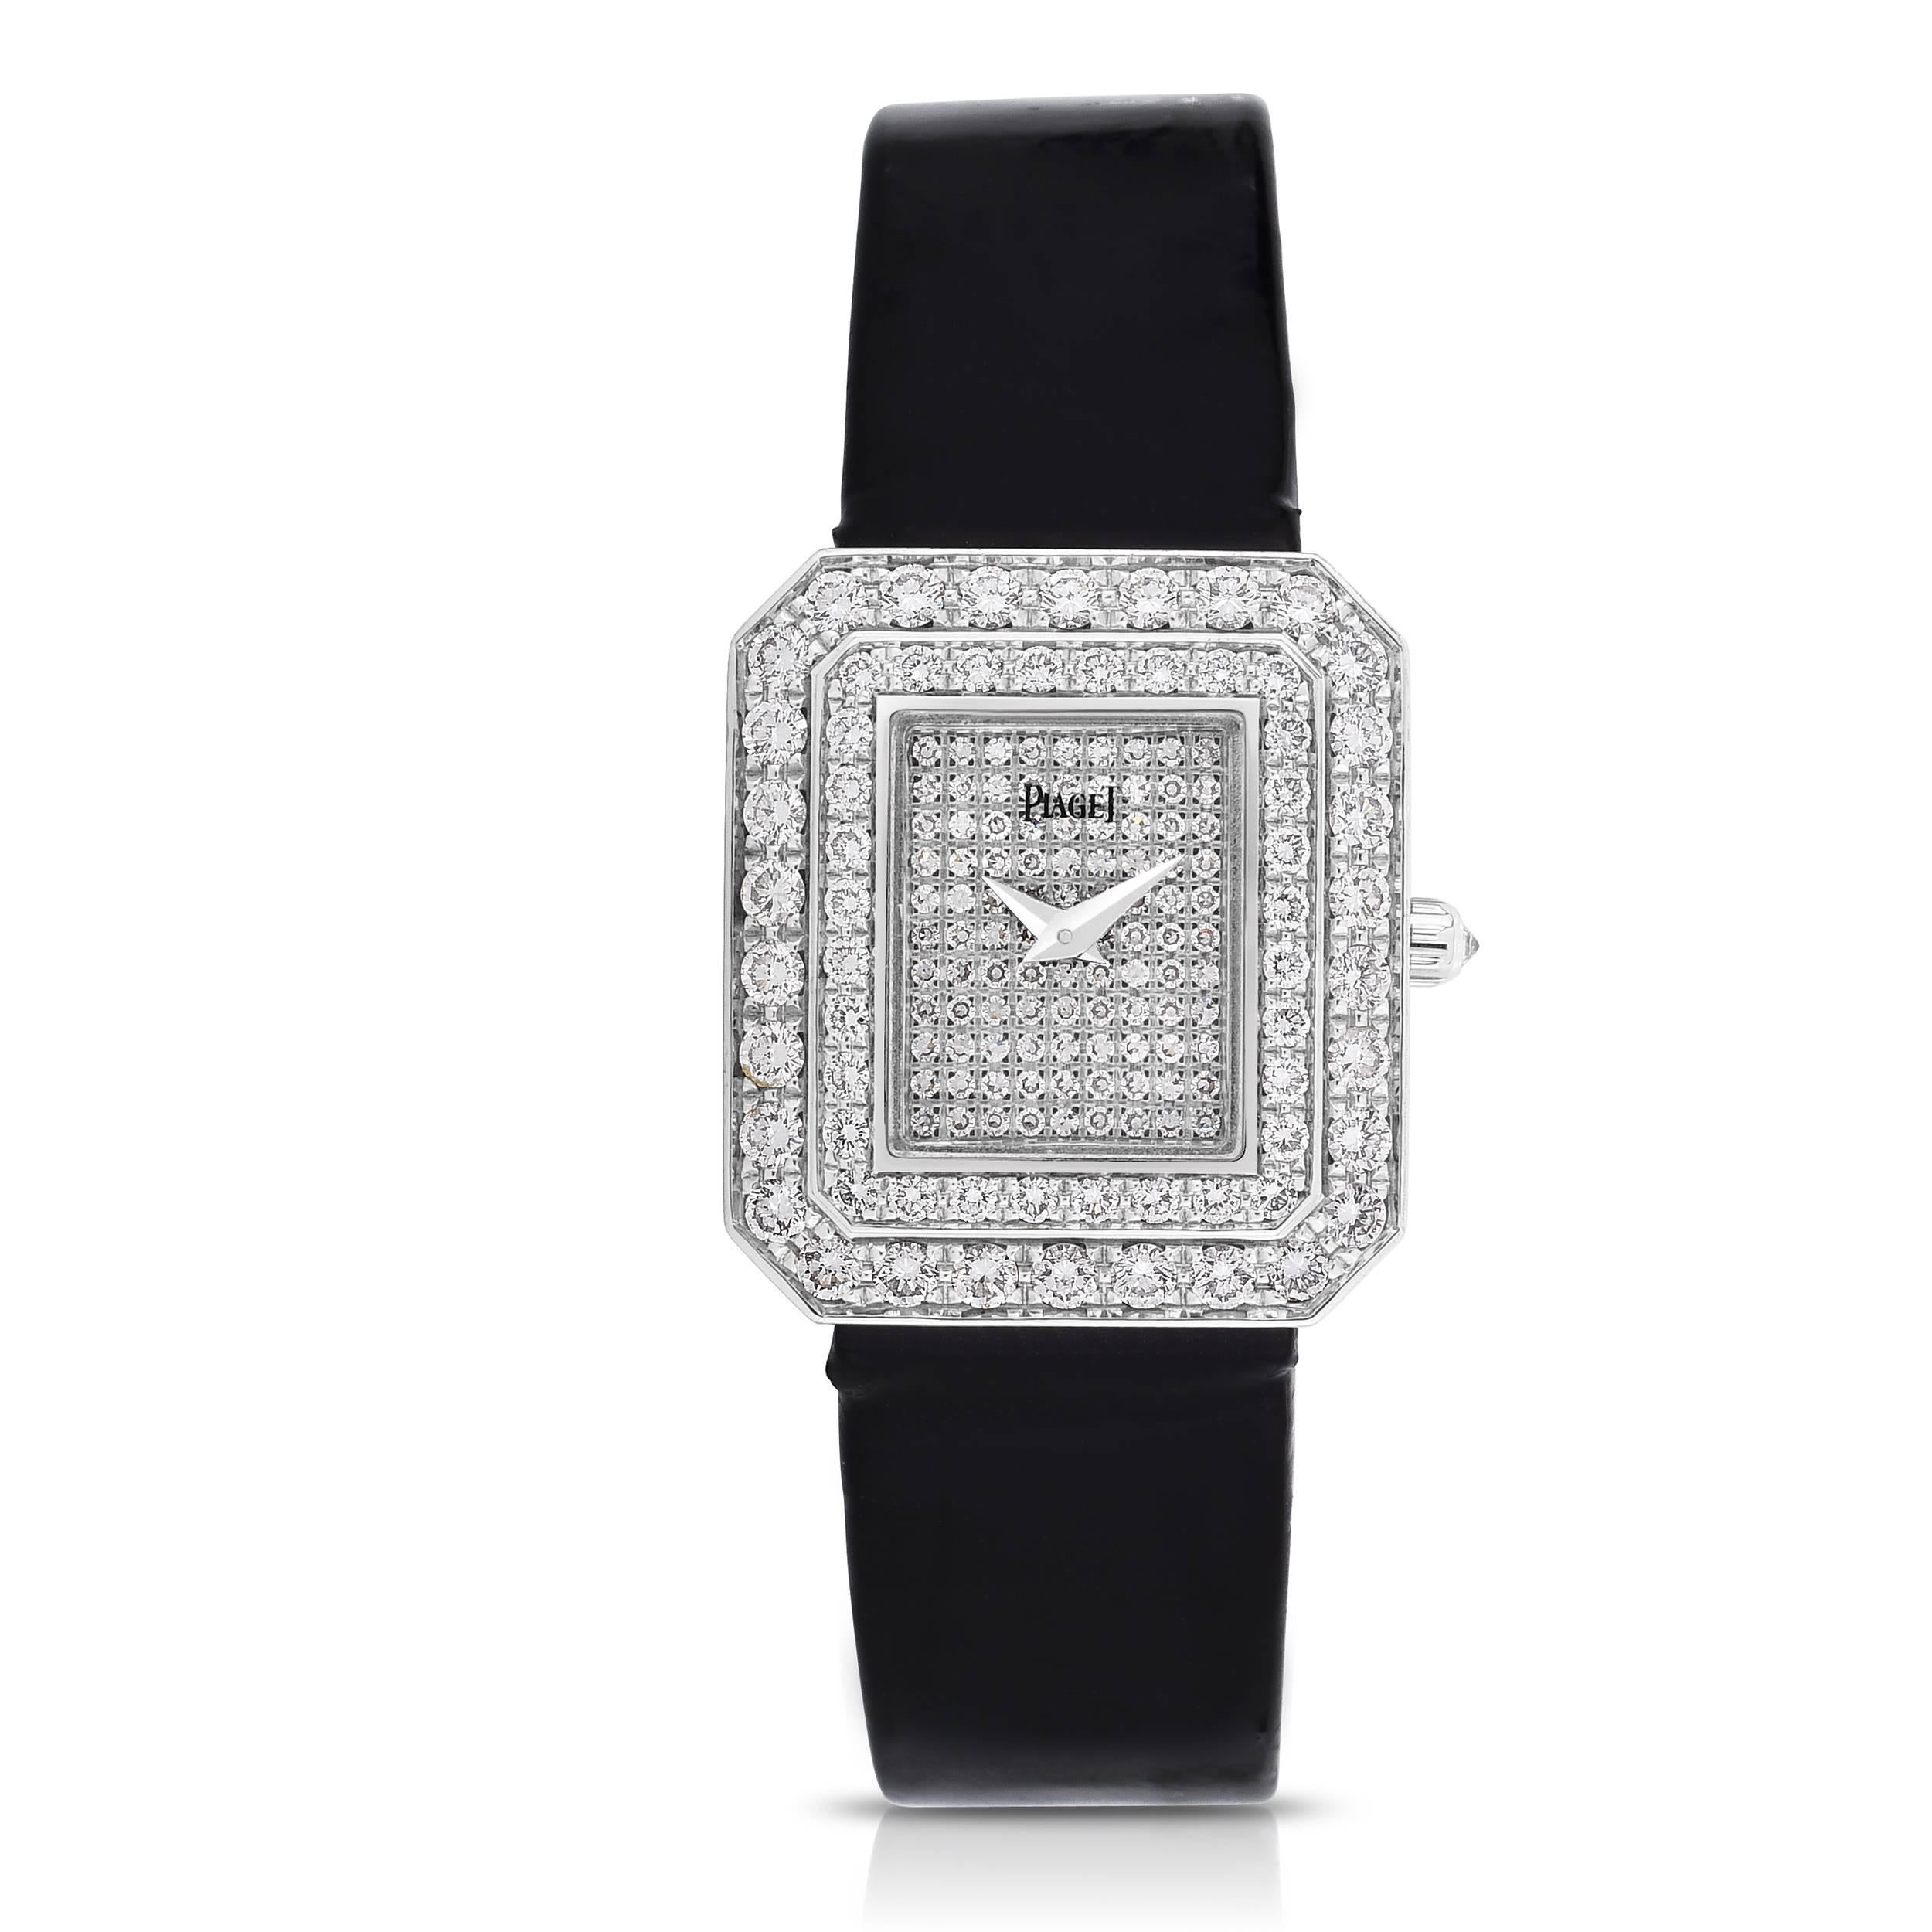 Ladies Piaget 18K White Gold and Diamond Dress Watch
Factory Diamond Dial, Bezel and Case
Quartz Movement 
Patent Leather Band
18K White Gold Deployment Buckle
Diamond Crown
In Pristine Condition
Comes with Letter of Authenticity and One-Year